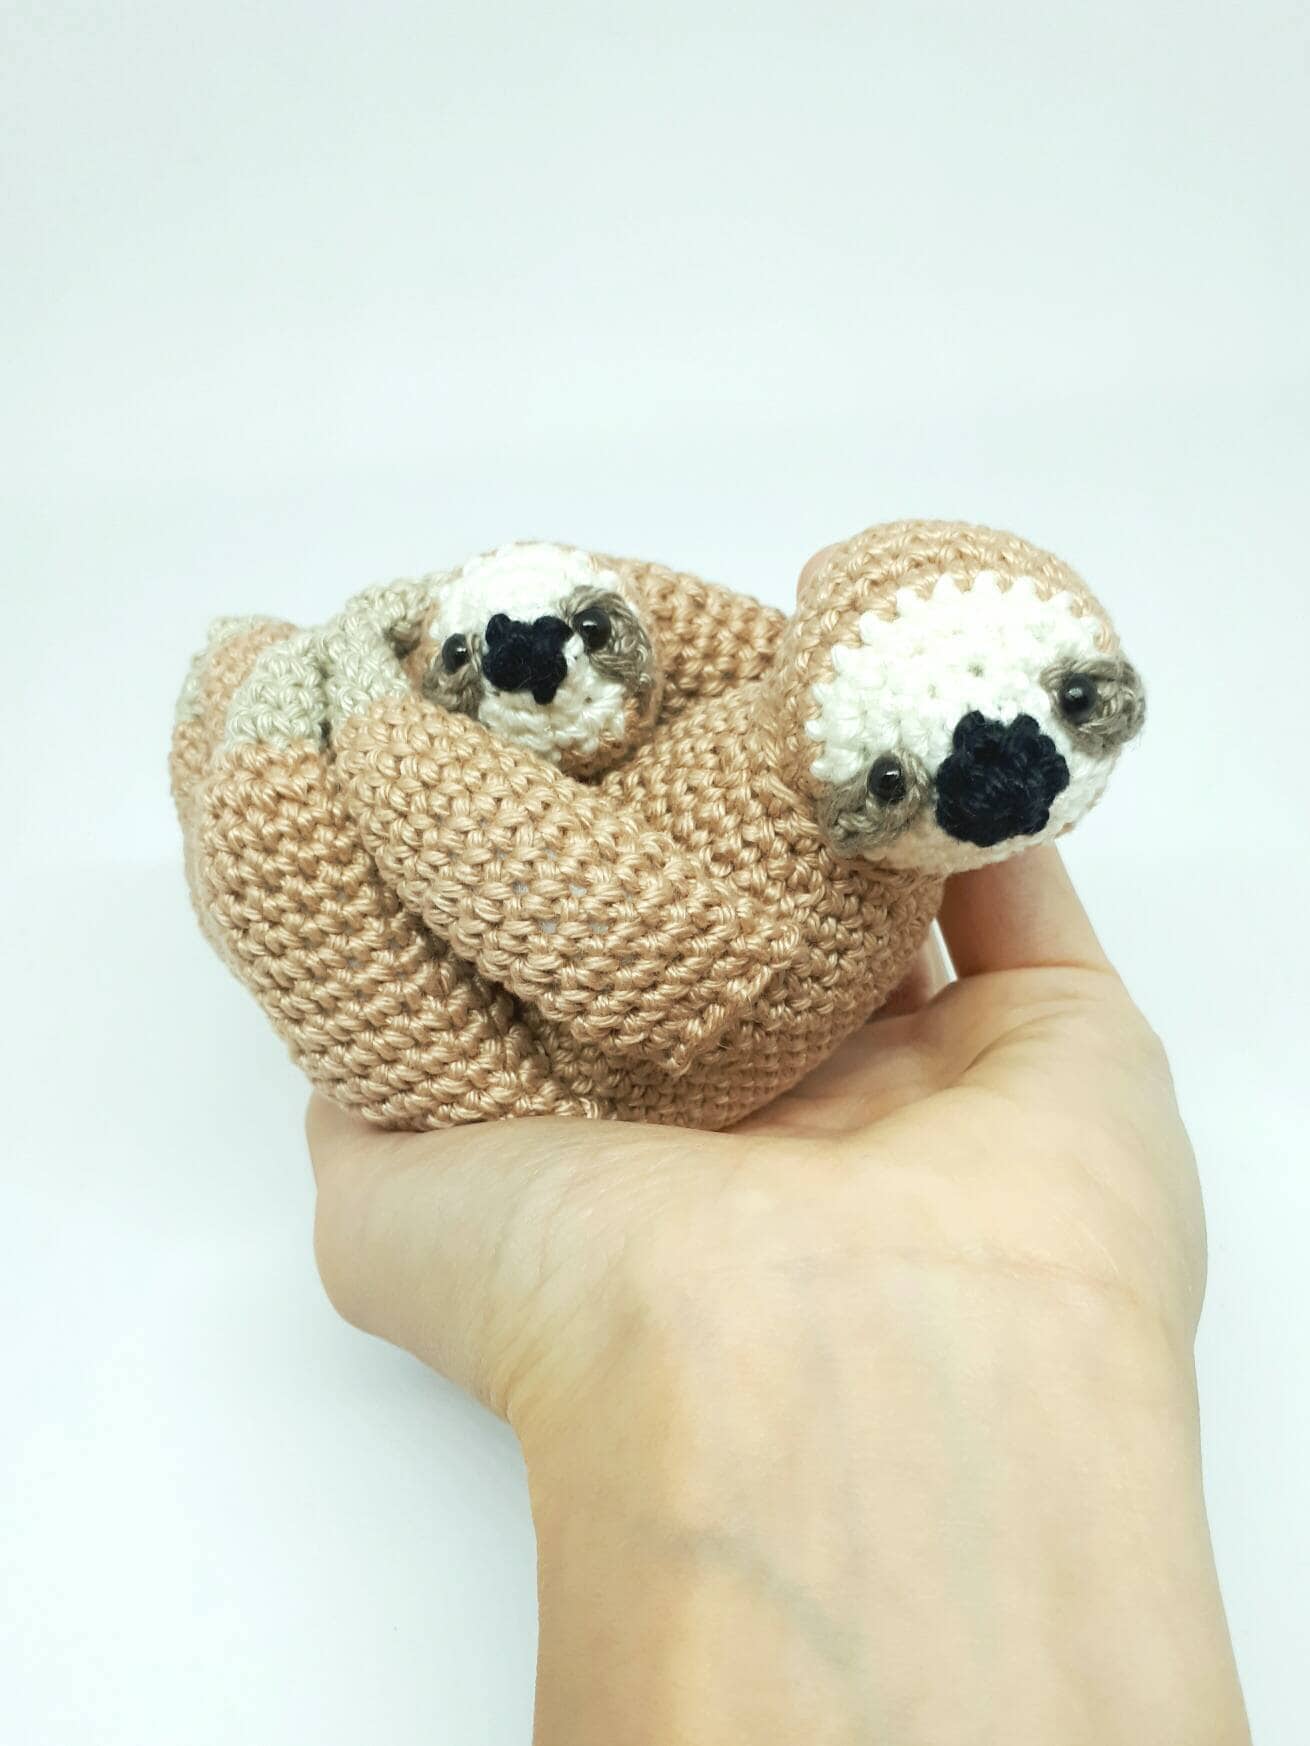 Mother and baby sloth stuffed animals plush toy